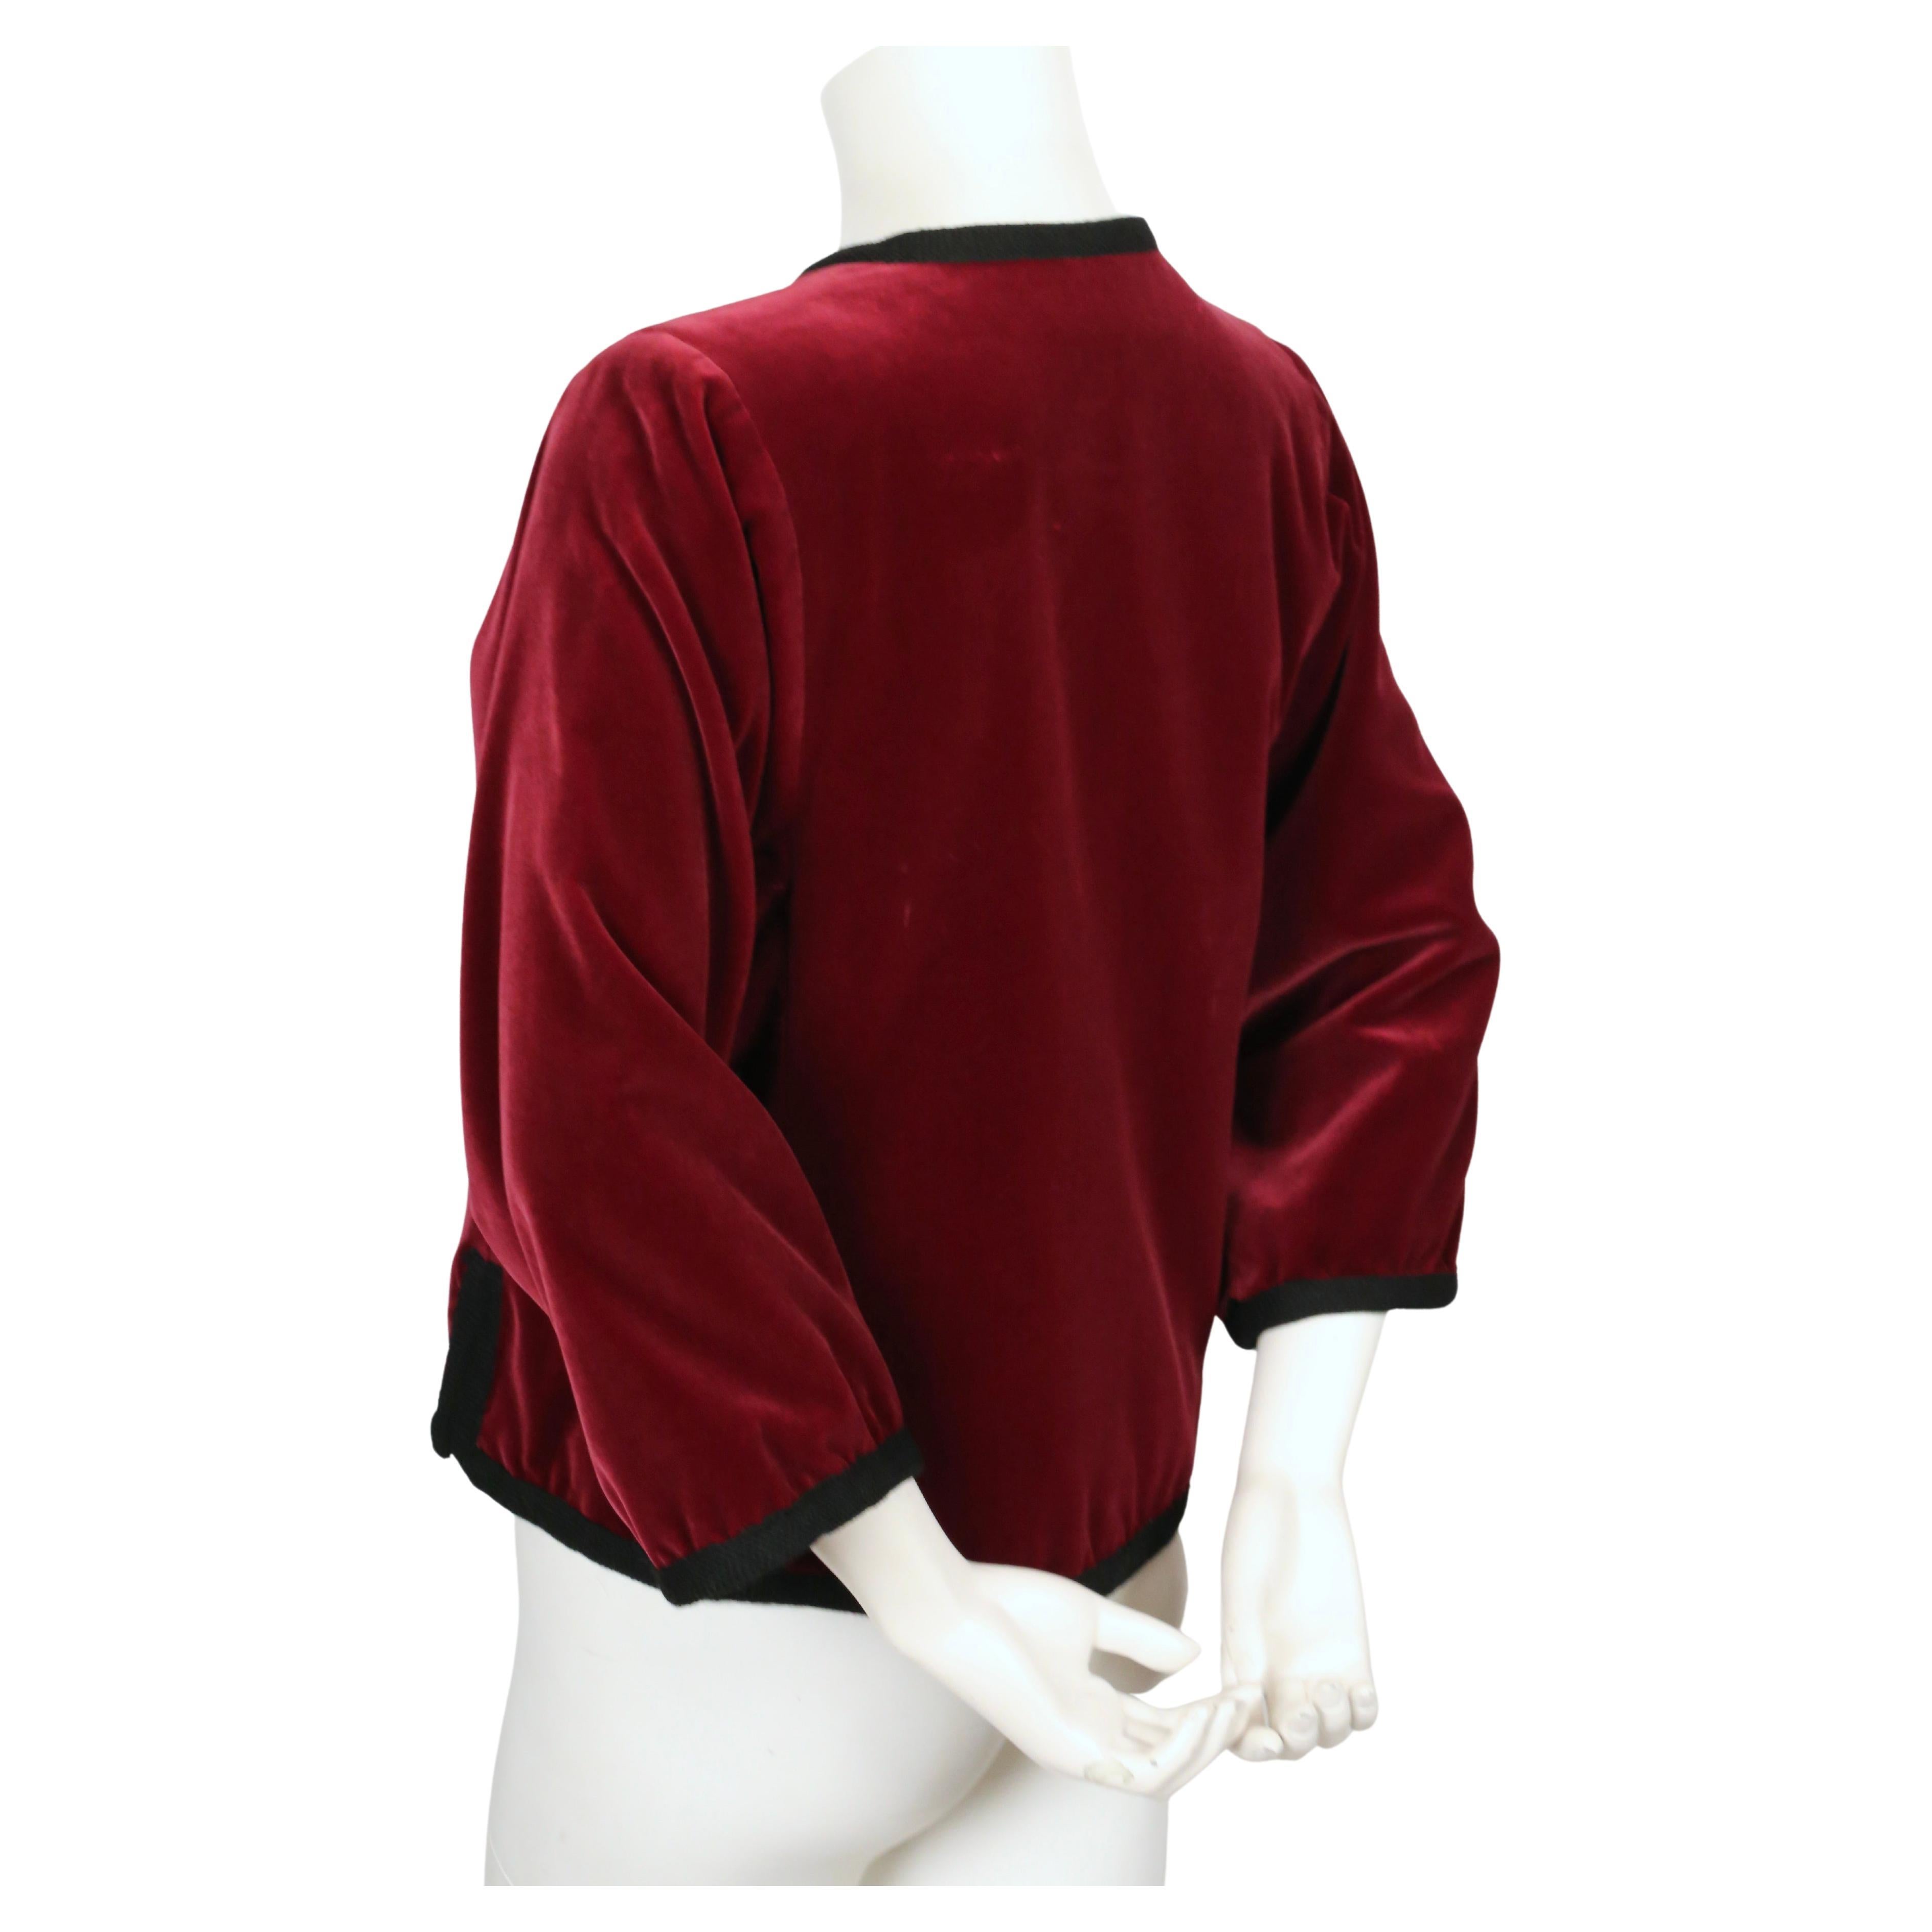 1976 YVES SAINT LAURENT Russian collection burgundy velvet jacket   In Good Condition For Sale In San Fransisco, CA